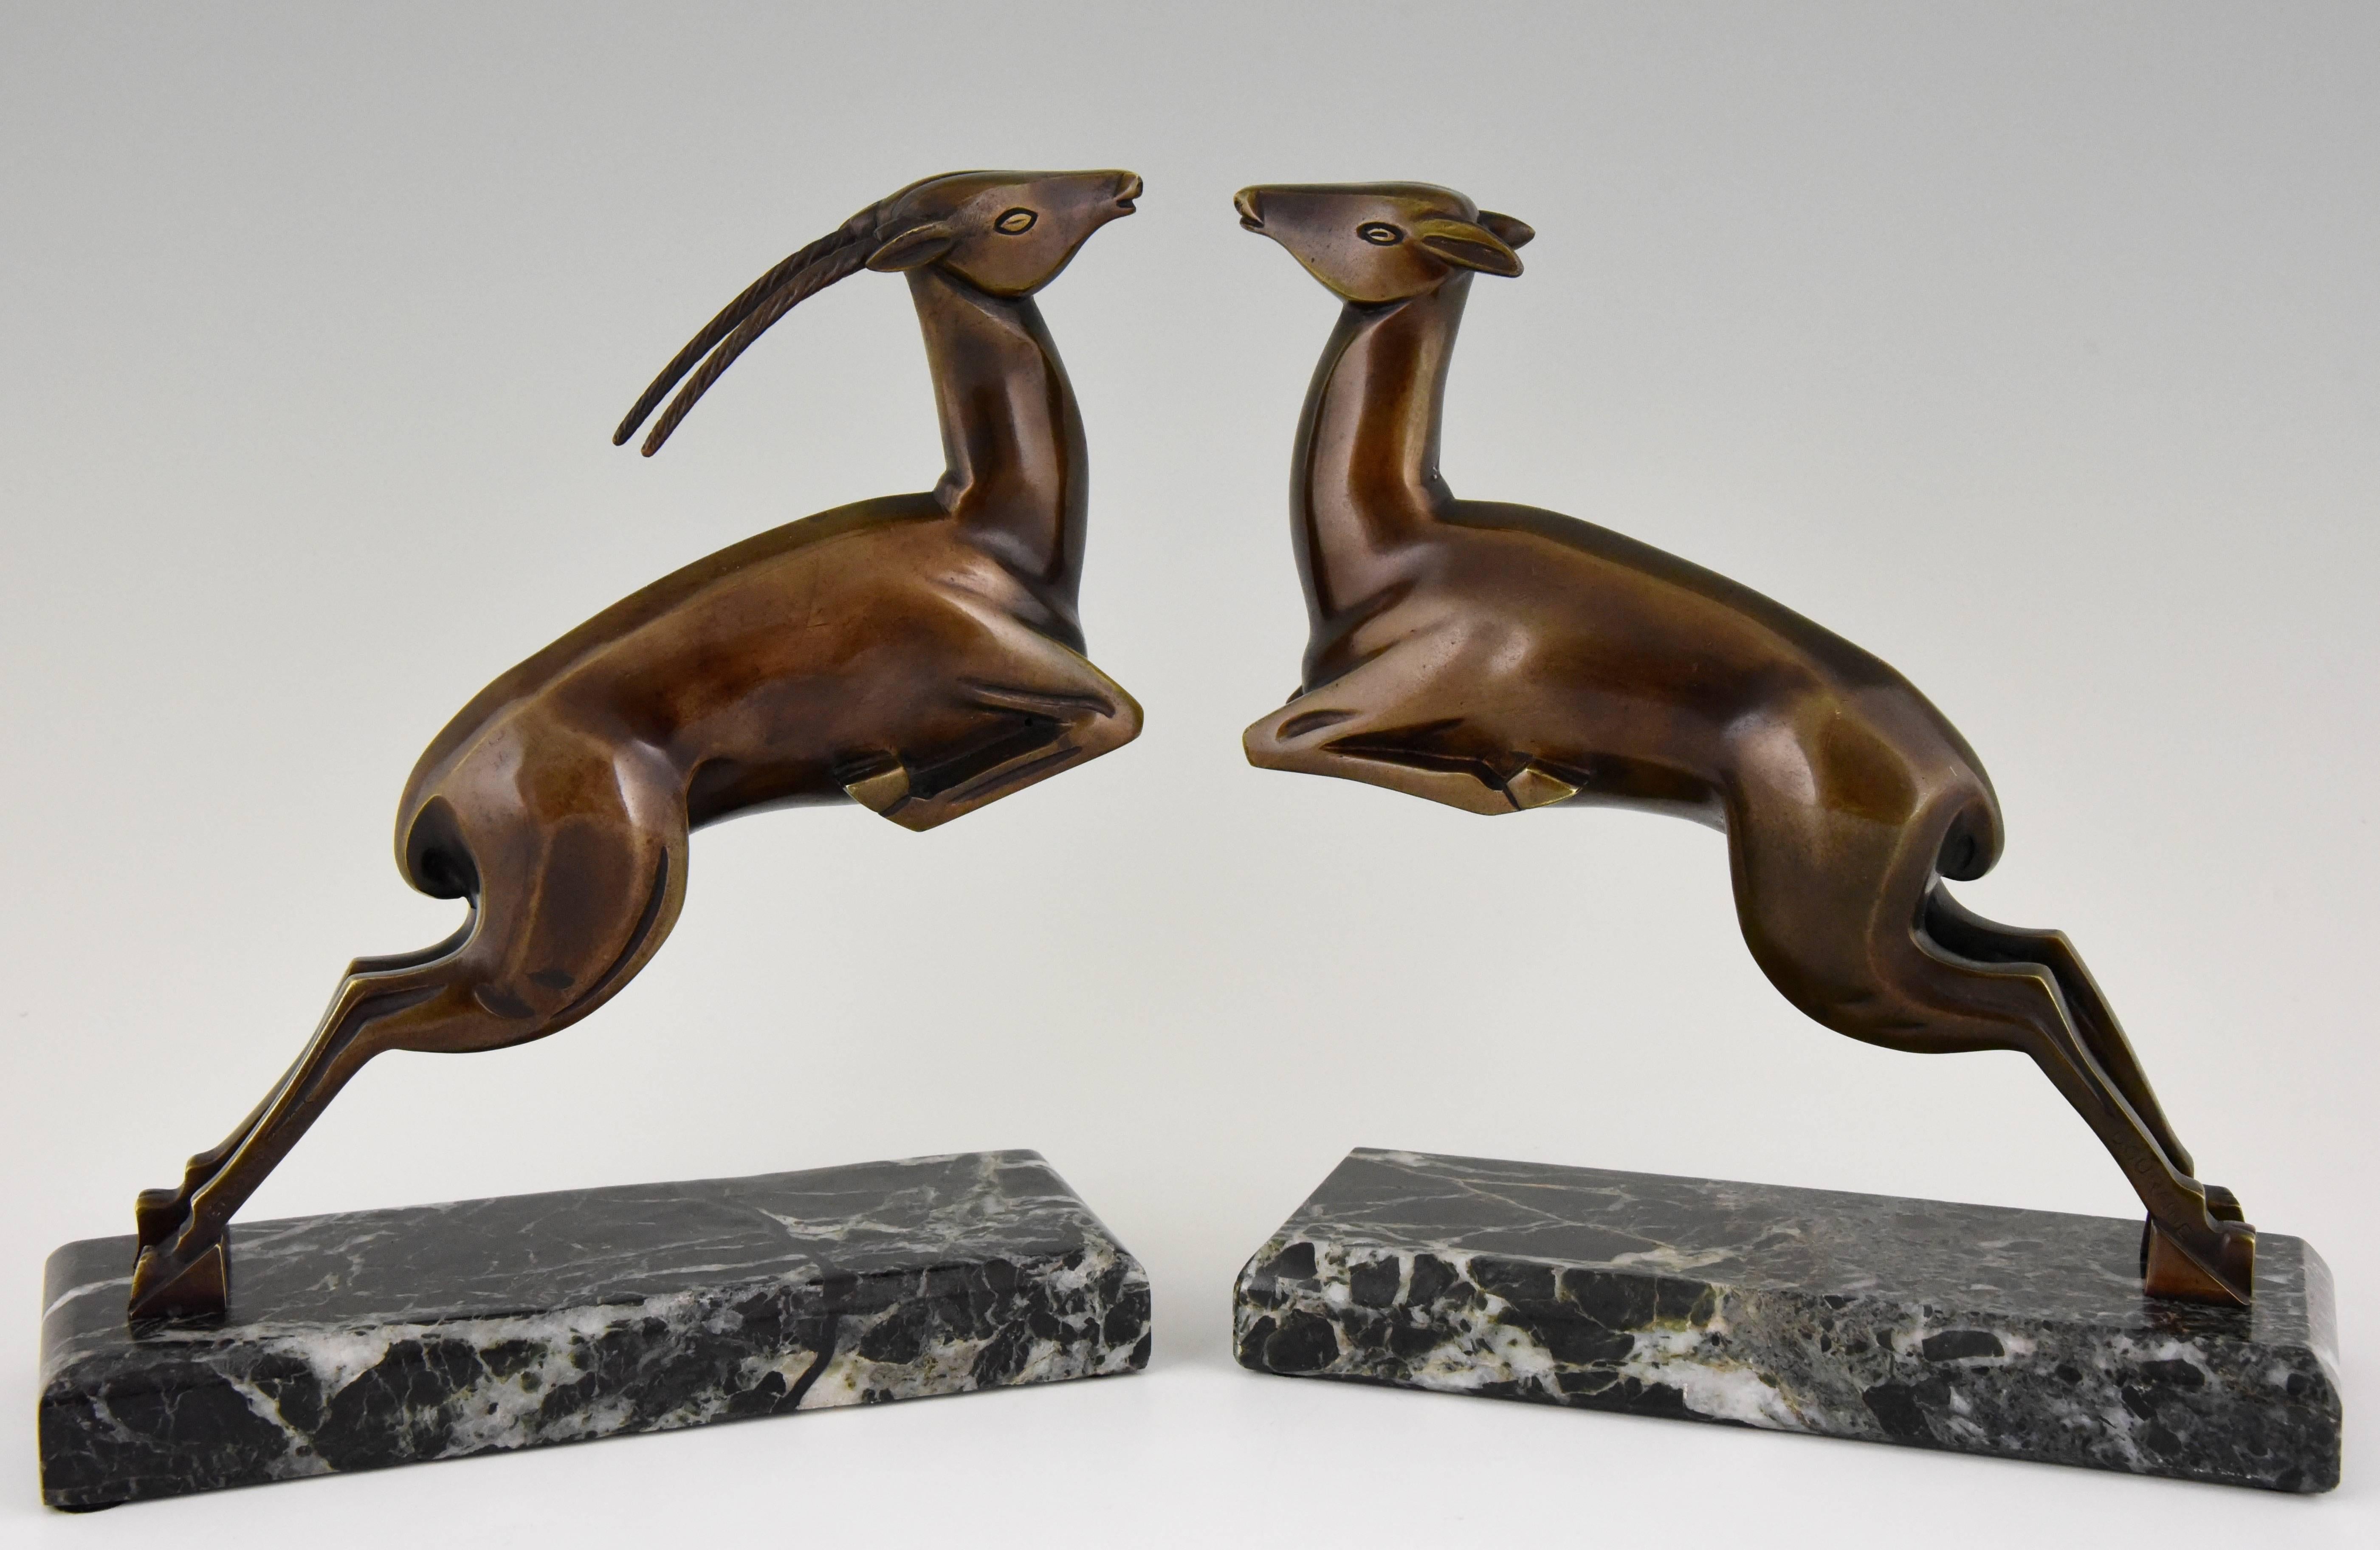 A pair of elegant French Art Deco bronze sculptural bookends with leaping gazelles on green marble bases by Marcel André Bouraine, 1886-1948. 

Artist/ Maker: Marcel Bouraine
Signature/ Marks: Bouraine, Etling Paris, founders’ signature.
Style: